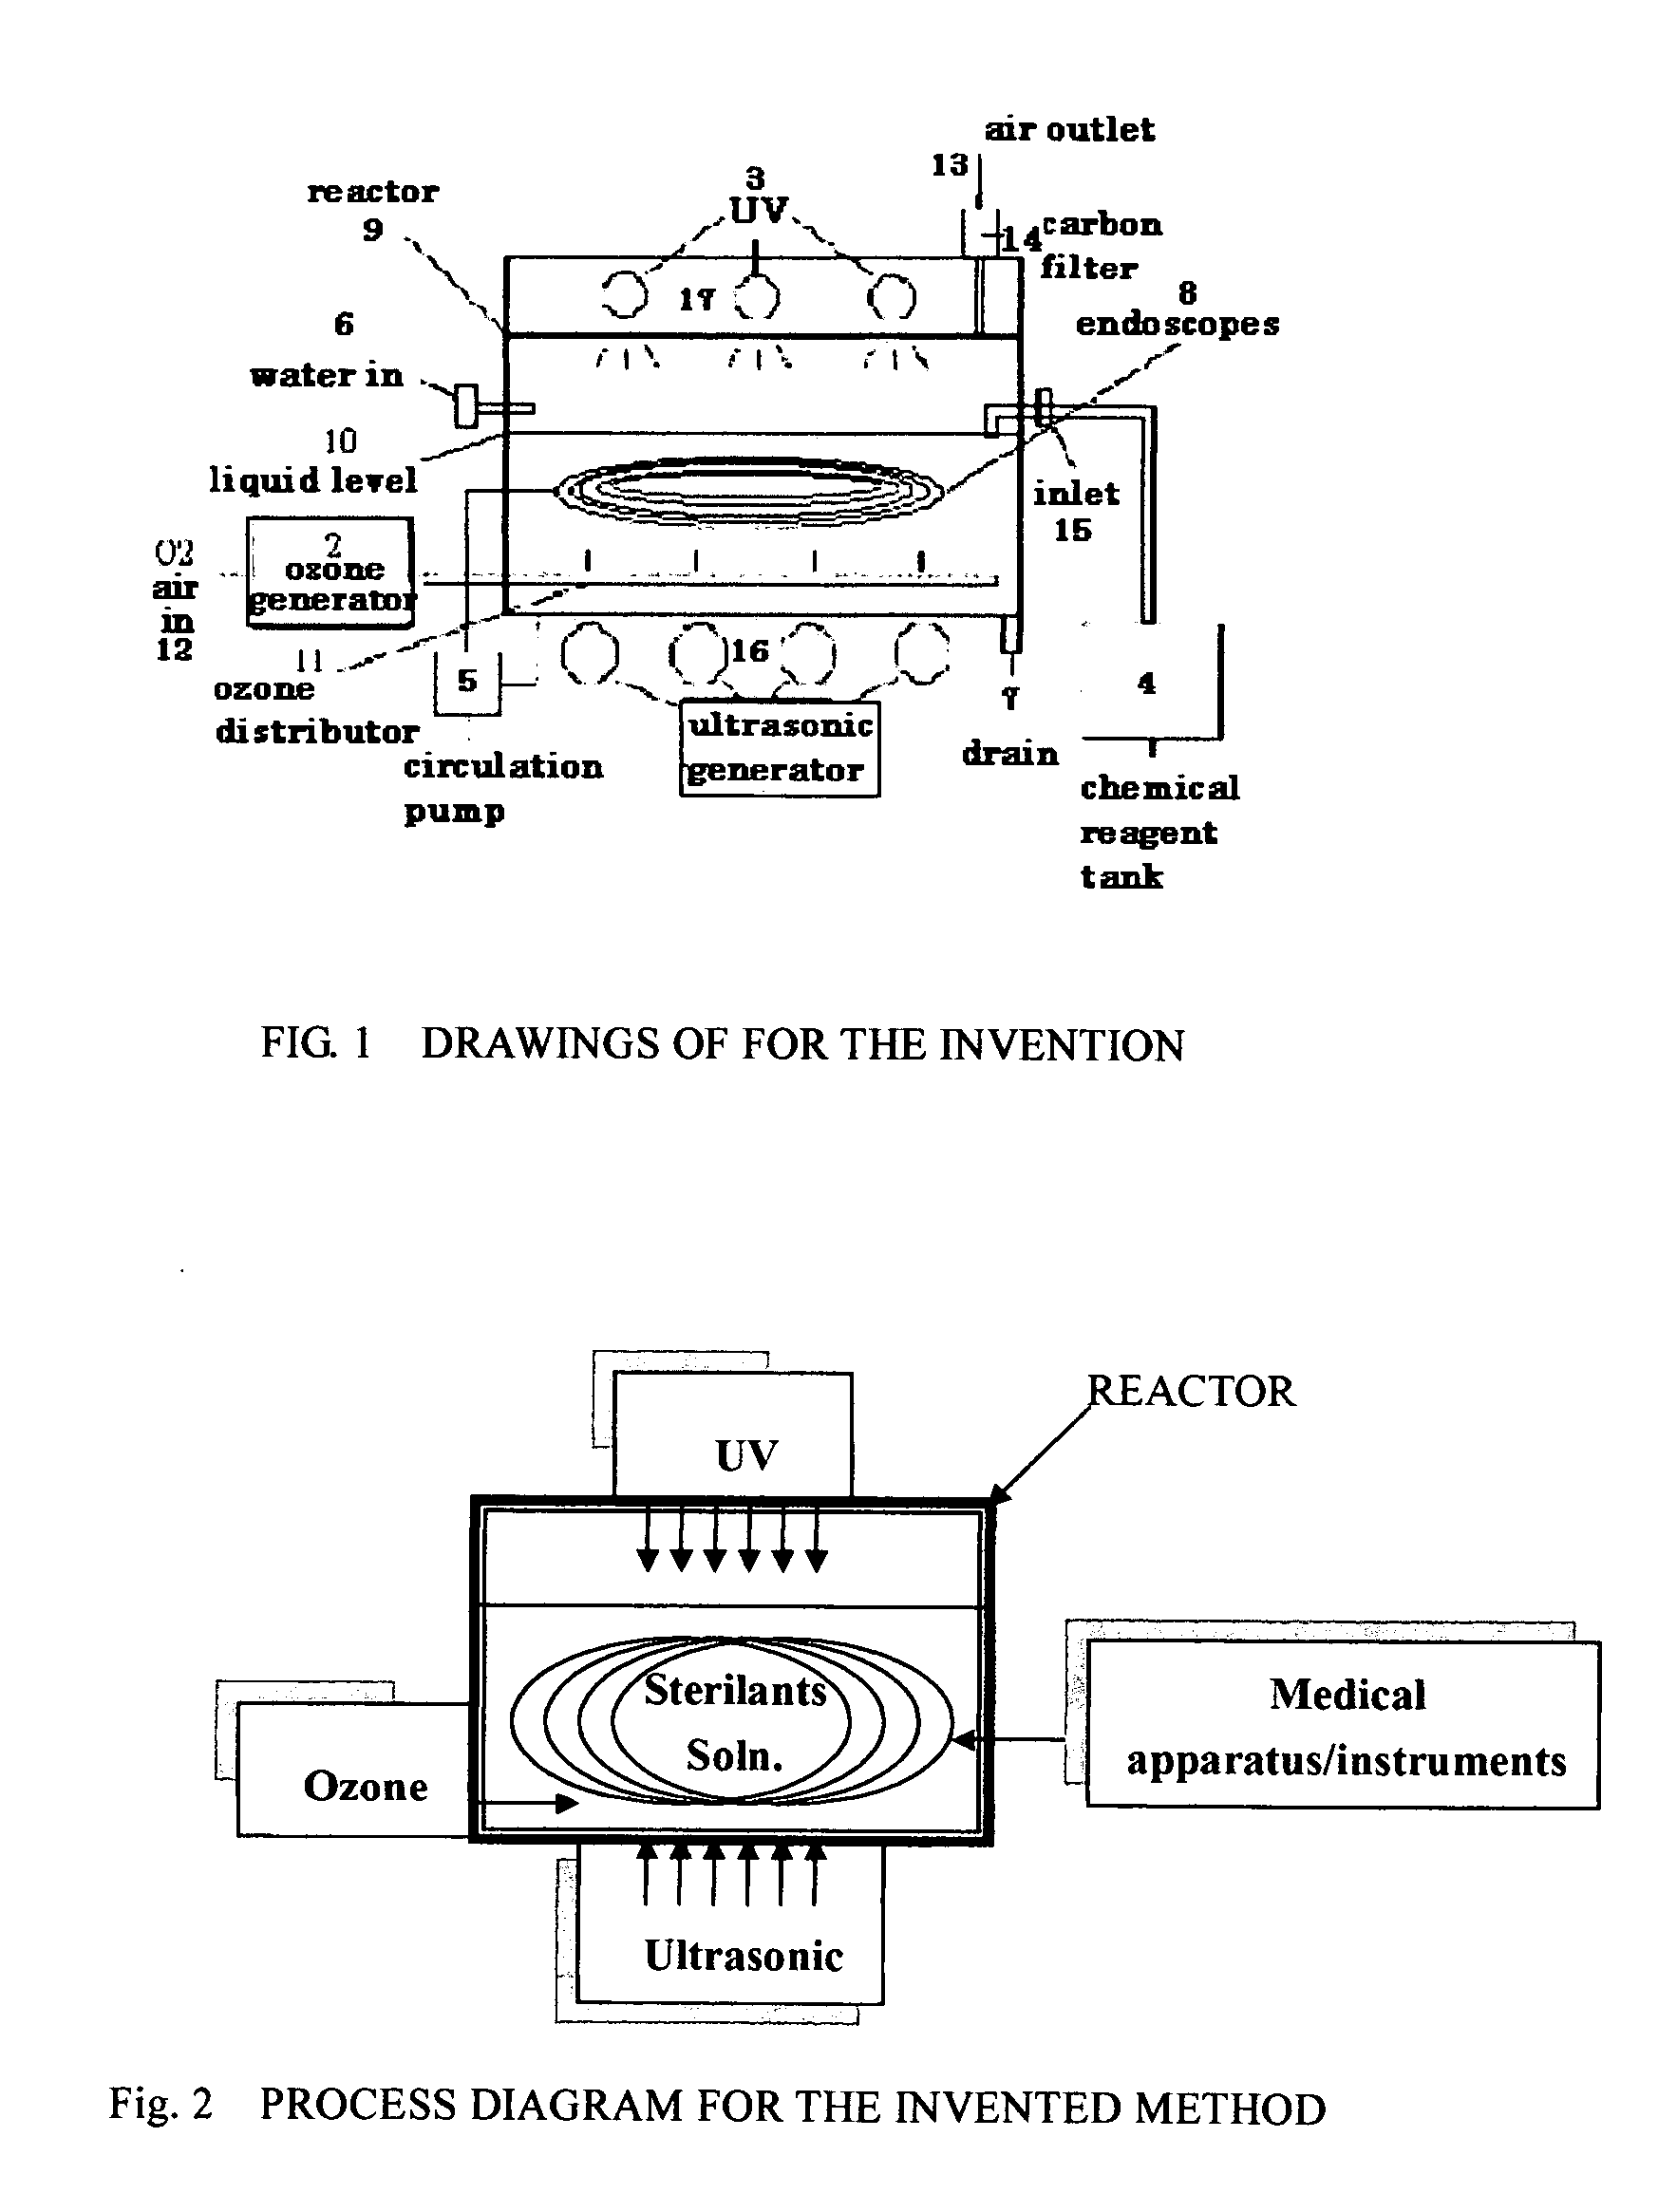 Low temperature sterilization and disinfections method and apparatus for medical apparatus and instruments